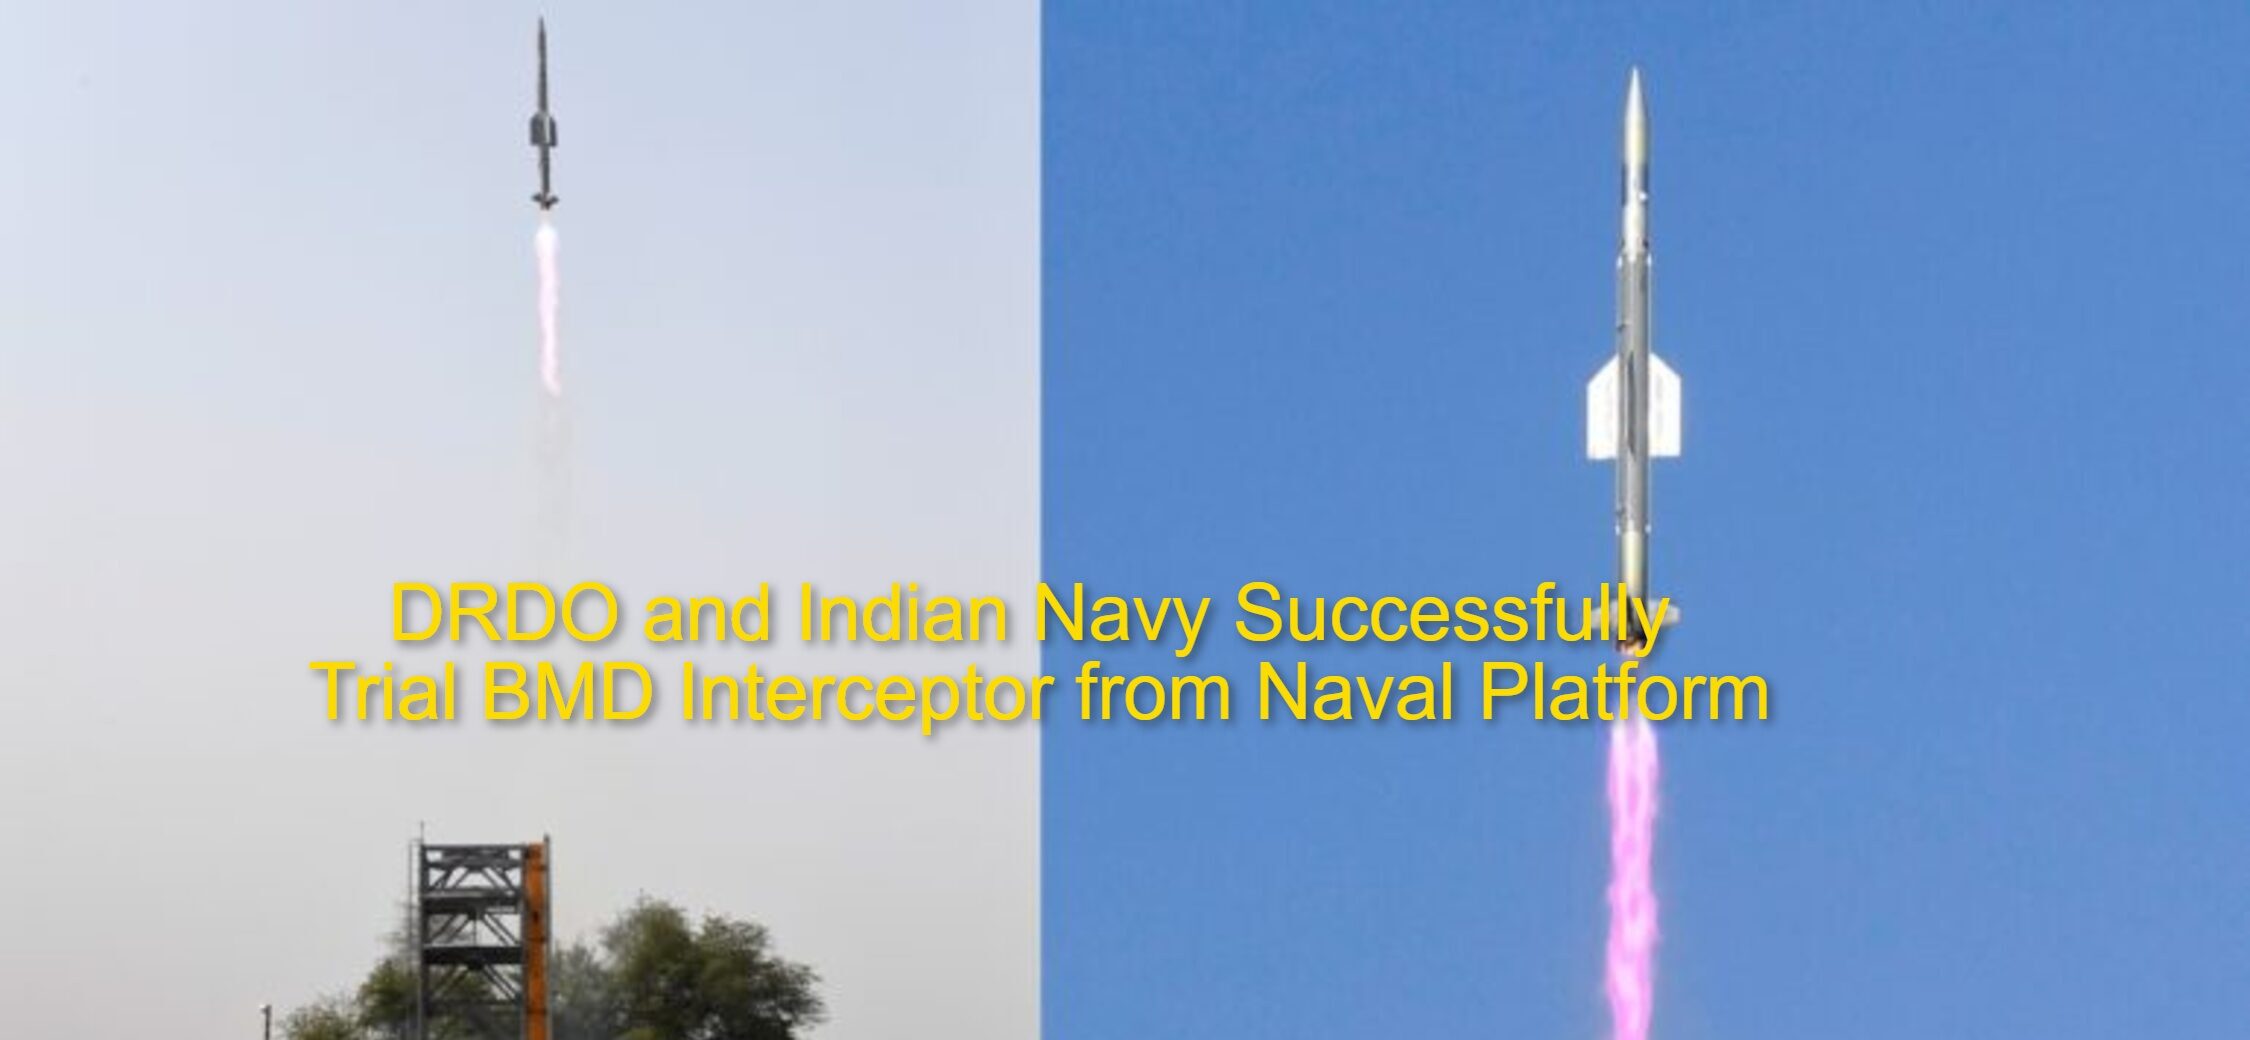 DRDO and Indian Navy Successfully Trial BMD Interceptor from Naval Platform